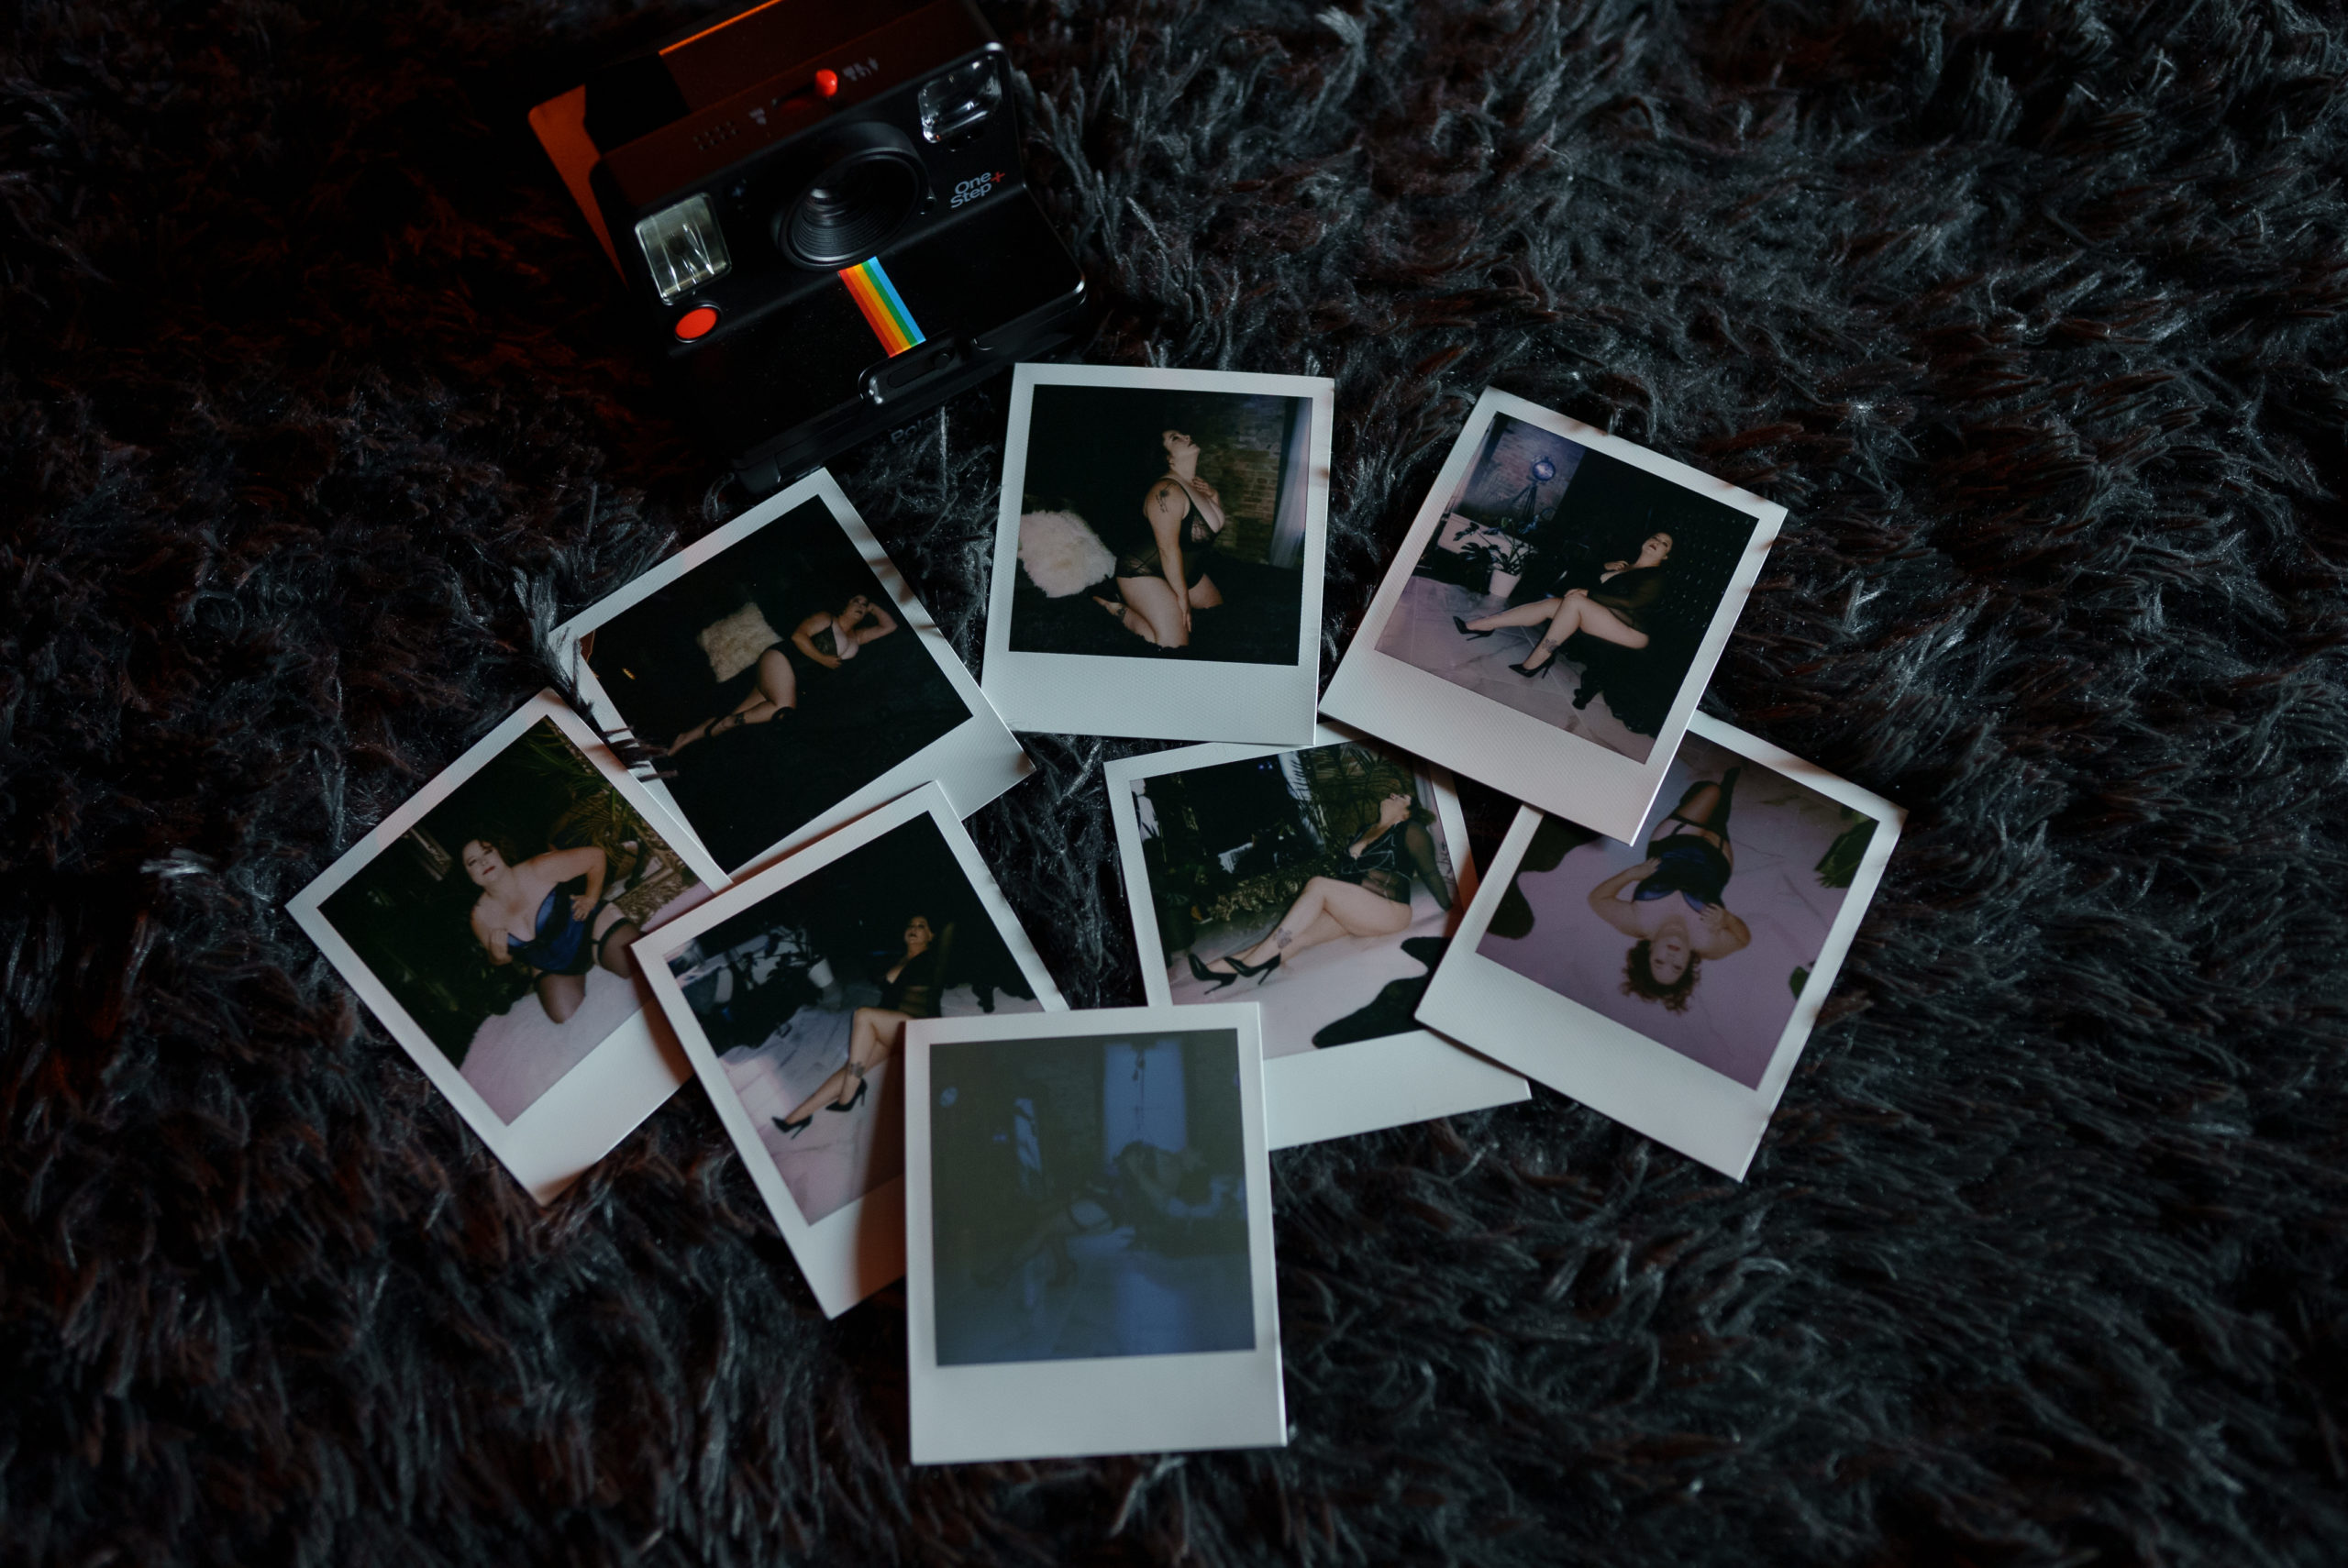 Polaroid Snapshots of Boudoir Photos and a camera are shown on a dark grey background.